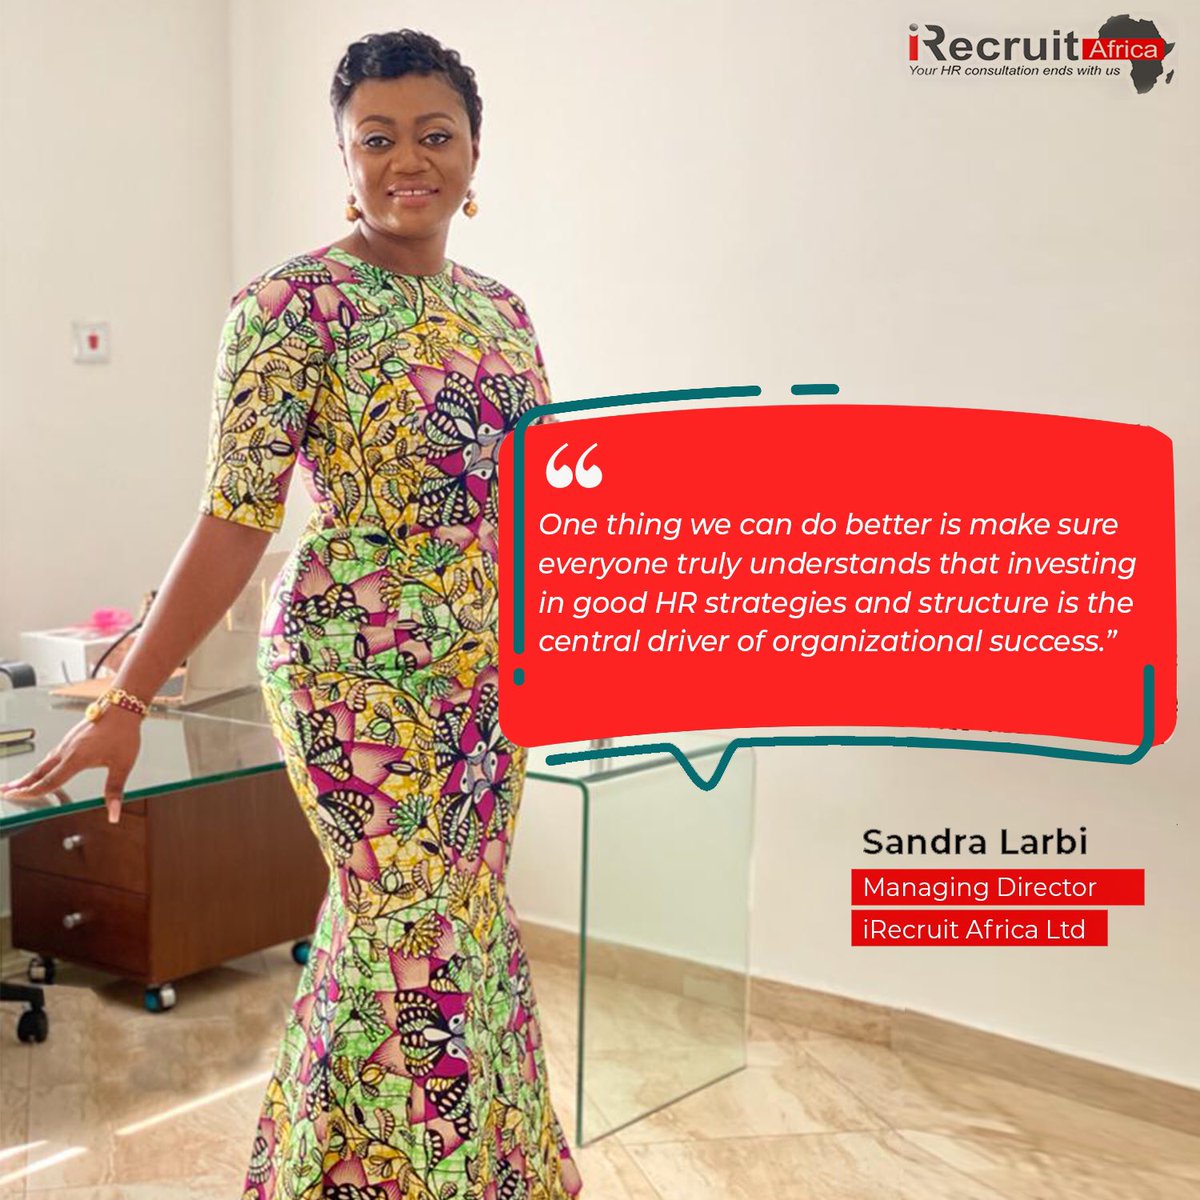 'One thing we can do better is make sure everyone truly understands that investing in good HR strategies and structure is the central driver of organizational success' - Sandra Larbi, Managing Director (iRecruit Africa Ltd)

#HR #HRPolicies #quote #goals #IR